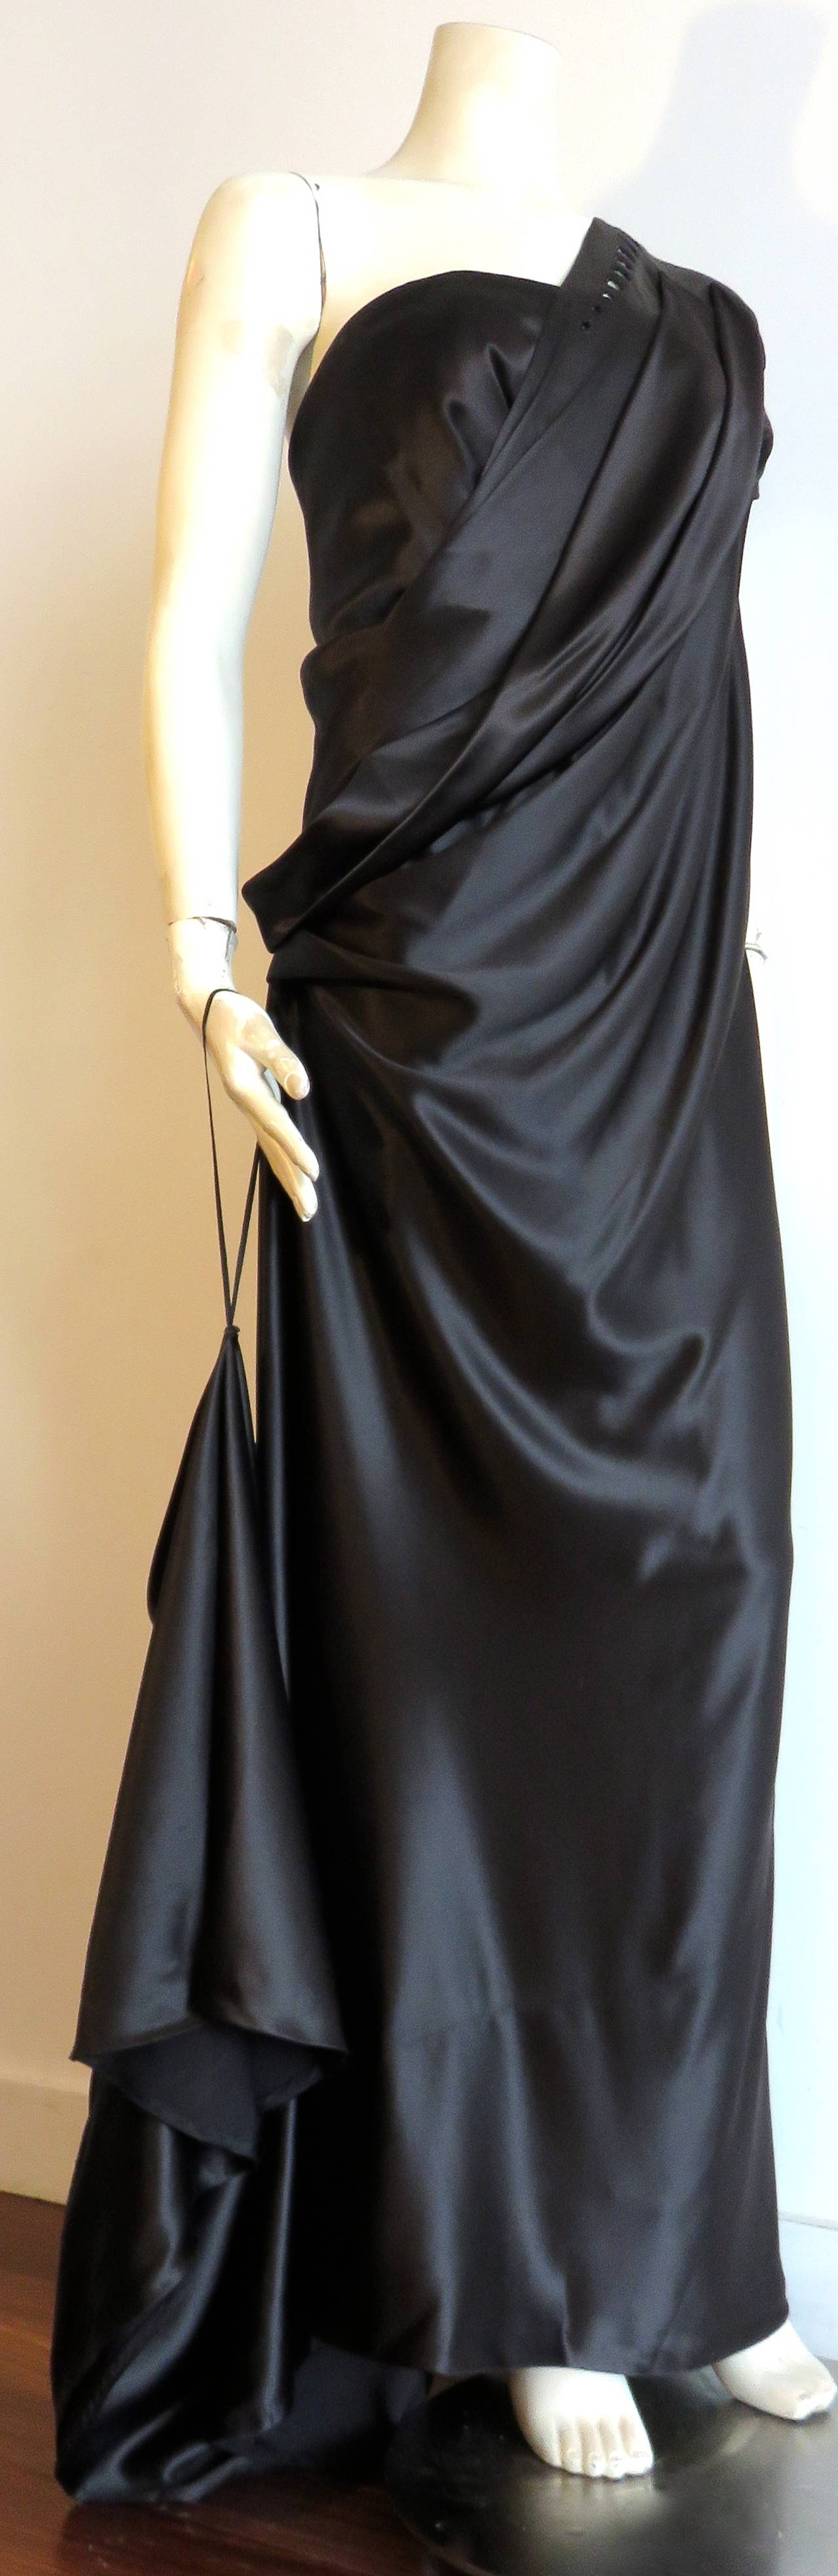 MARC JACOBS Silk charmeuse evening gown dress For Sale 3